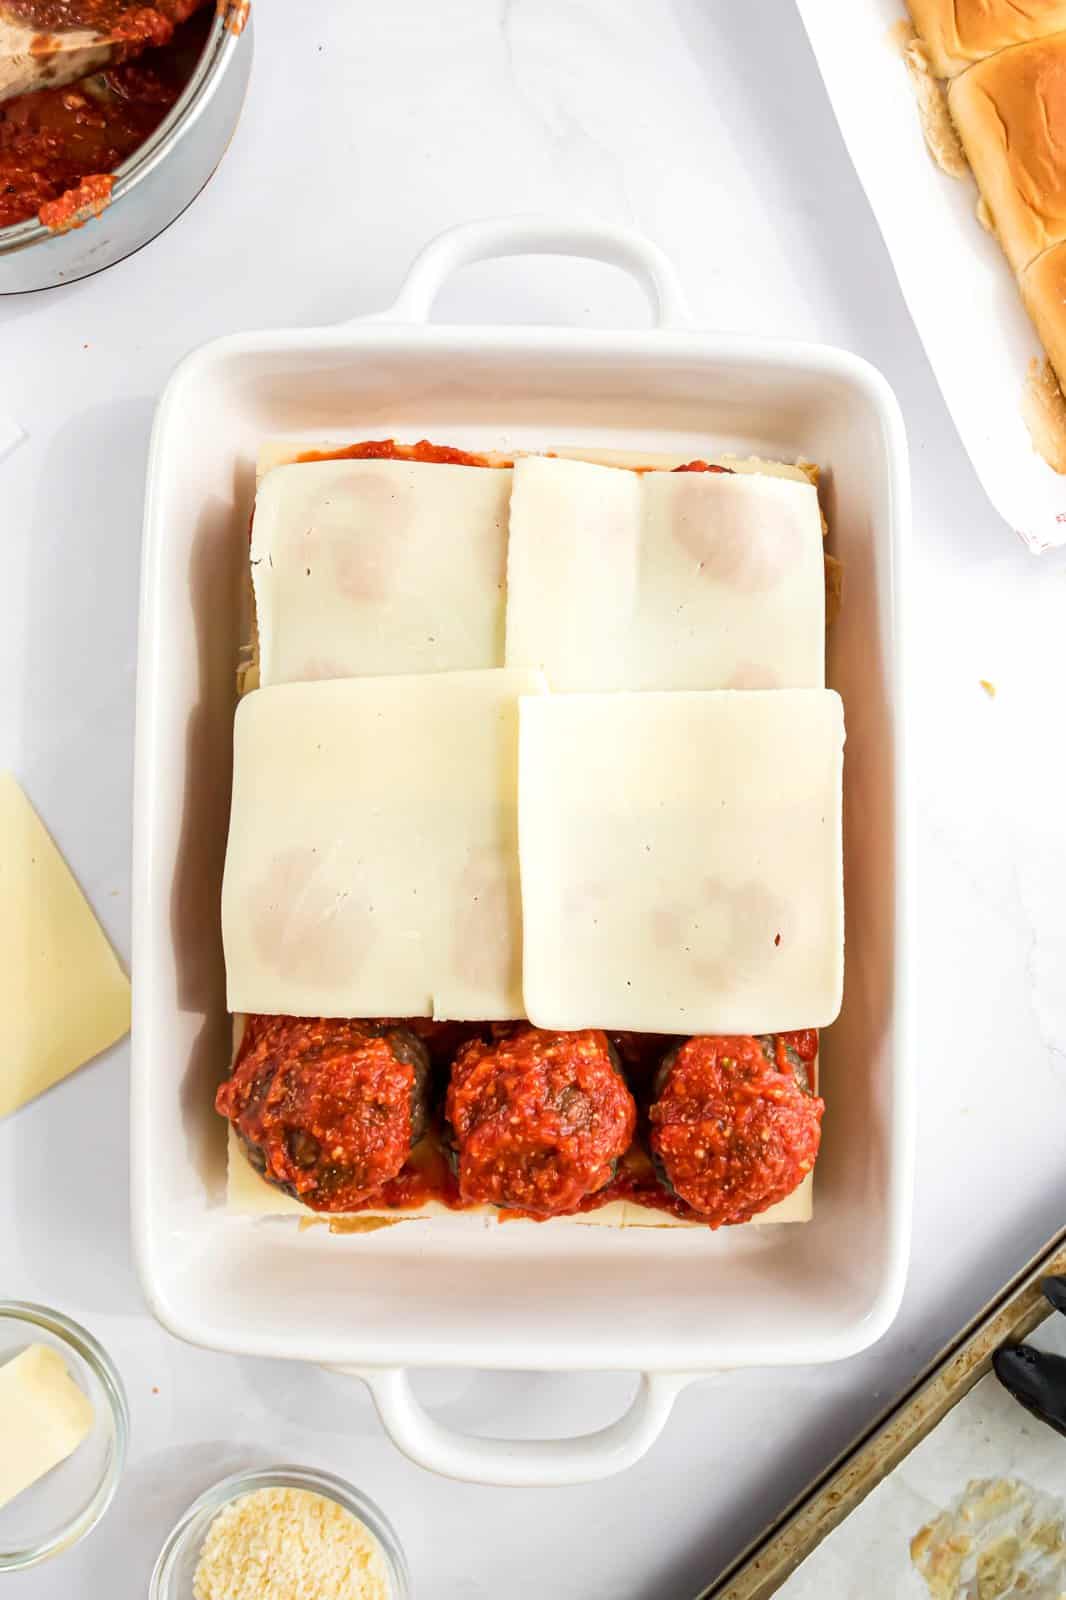 Meatballs on buns with sauce, and more cheese. 